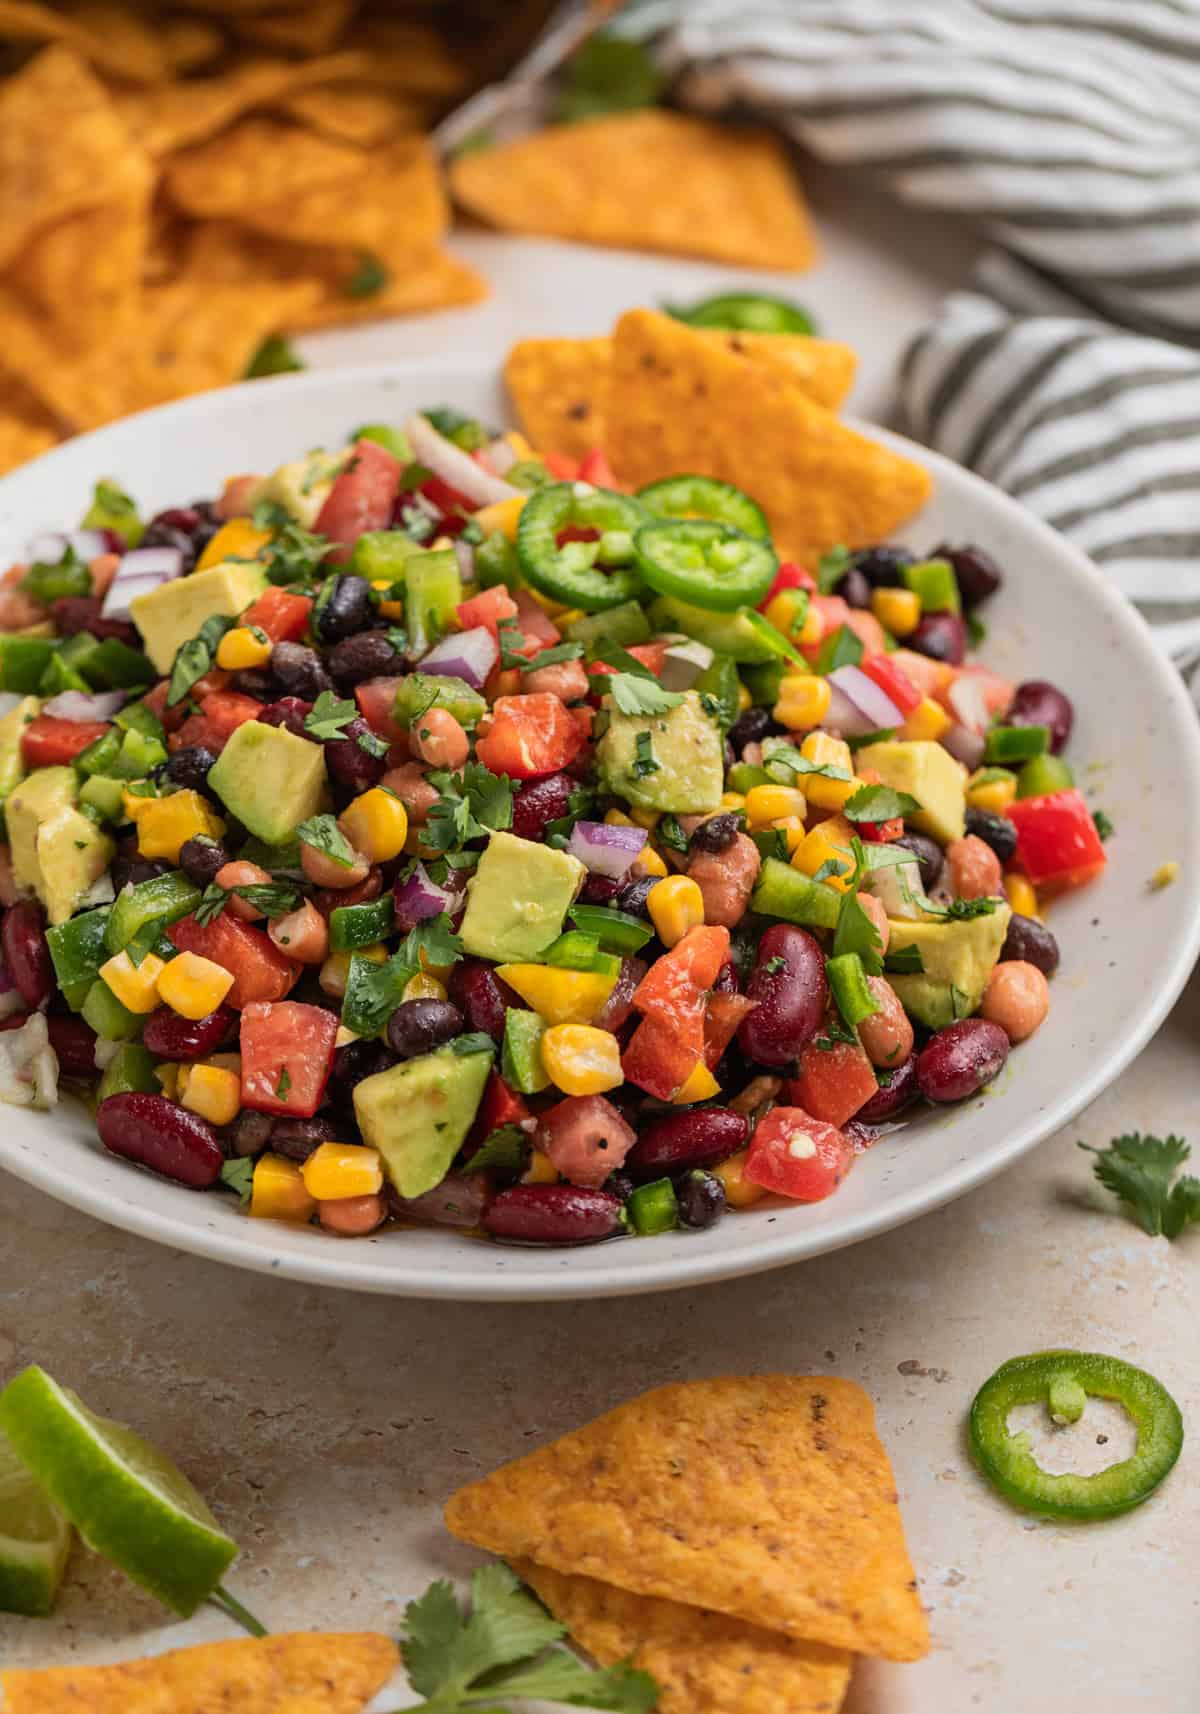 Chips dipped into bean and avocado salad with corn and topped with chopped cilantro.